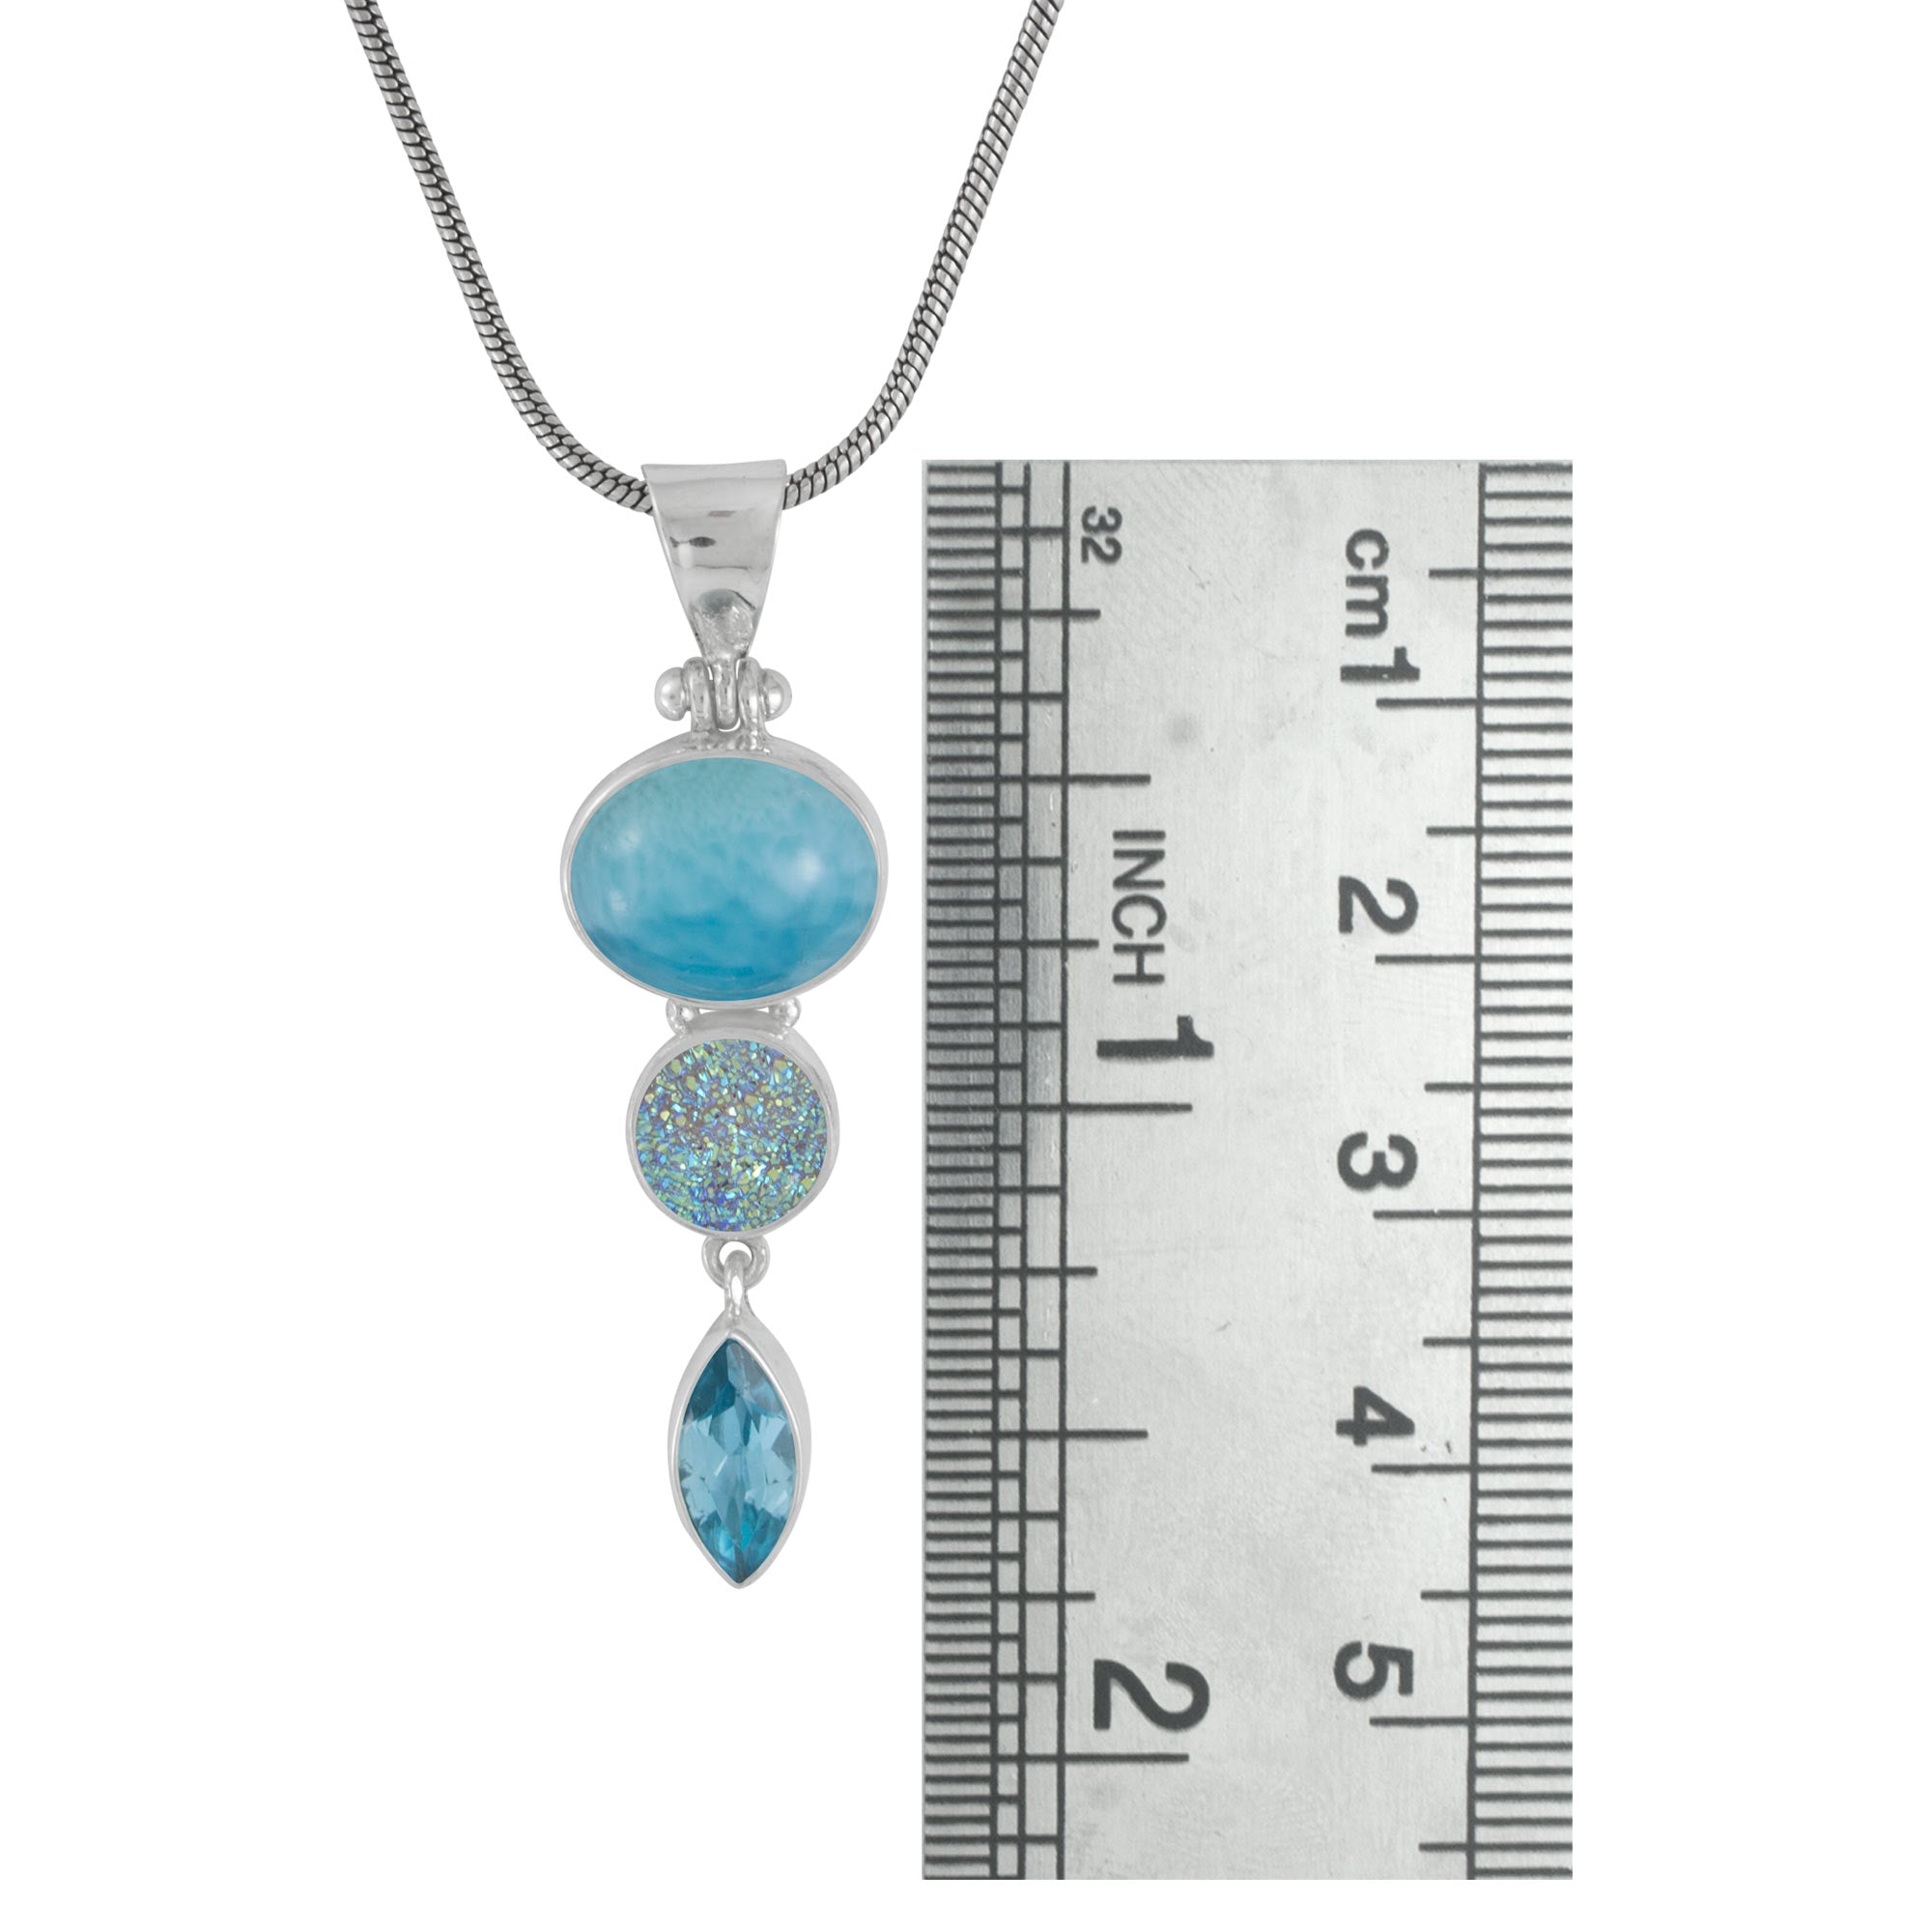 Sterling Silver Pendant With Larimar Oval, Druzy Opal Round And Blue Topaz Marqouise Facet